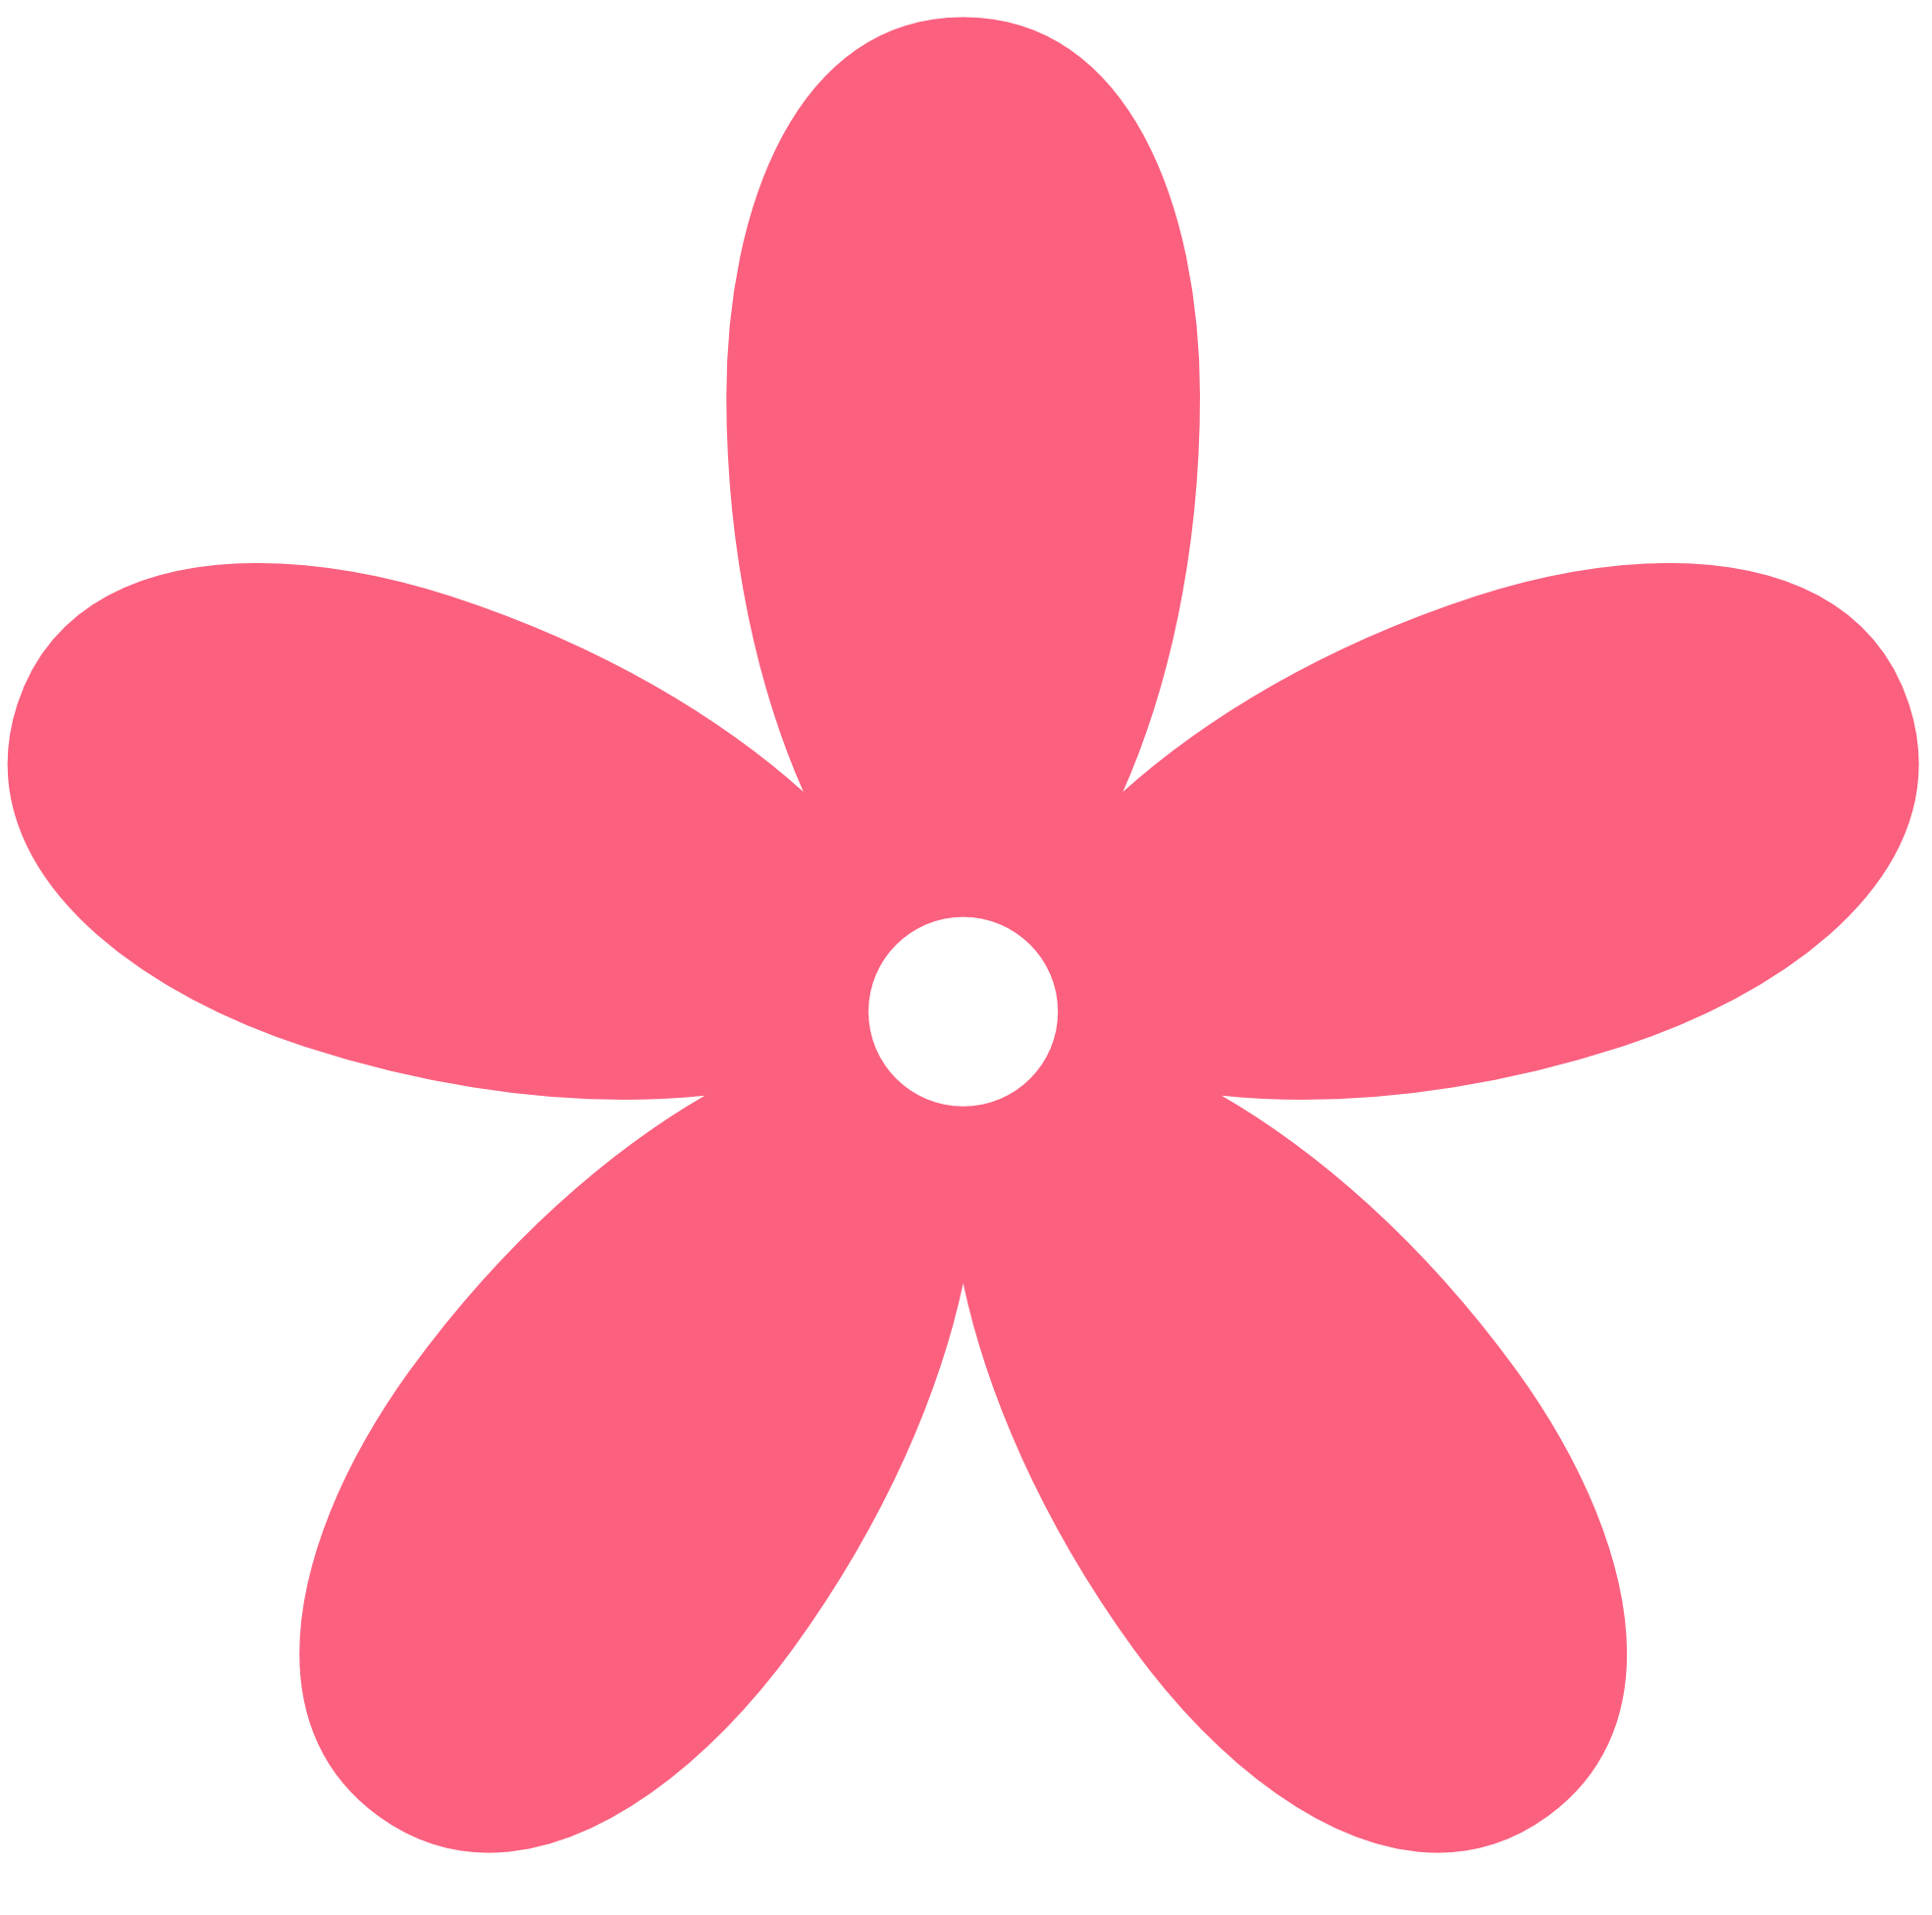 Flower Clip Art To Color - Free Clipart Images